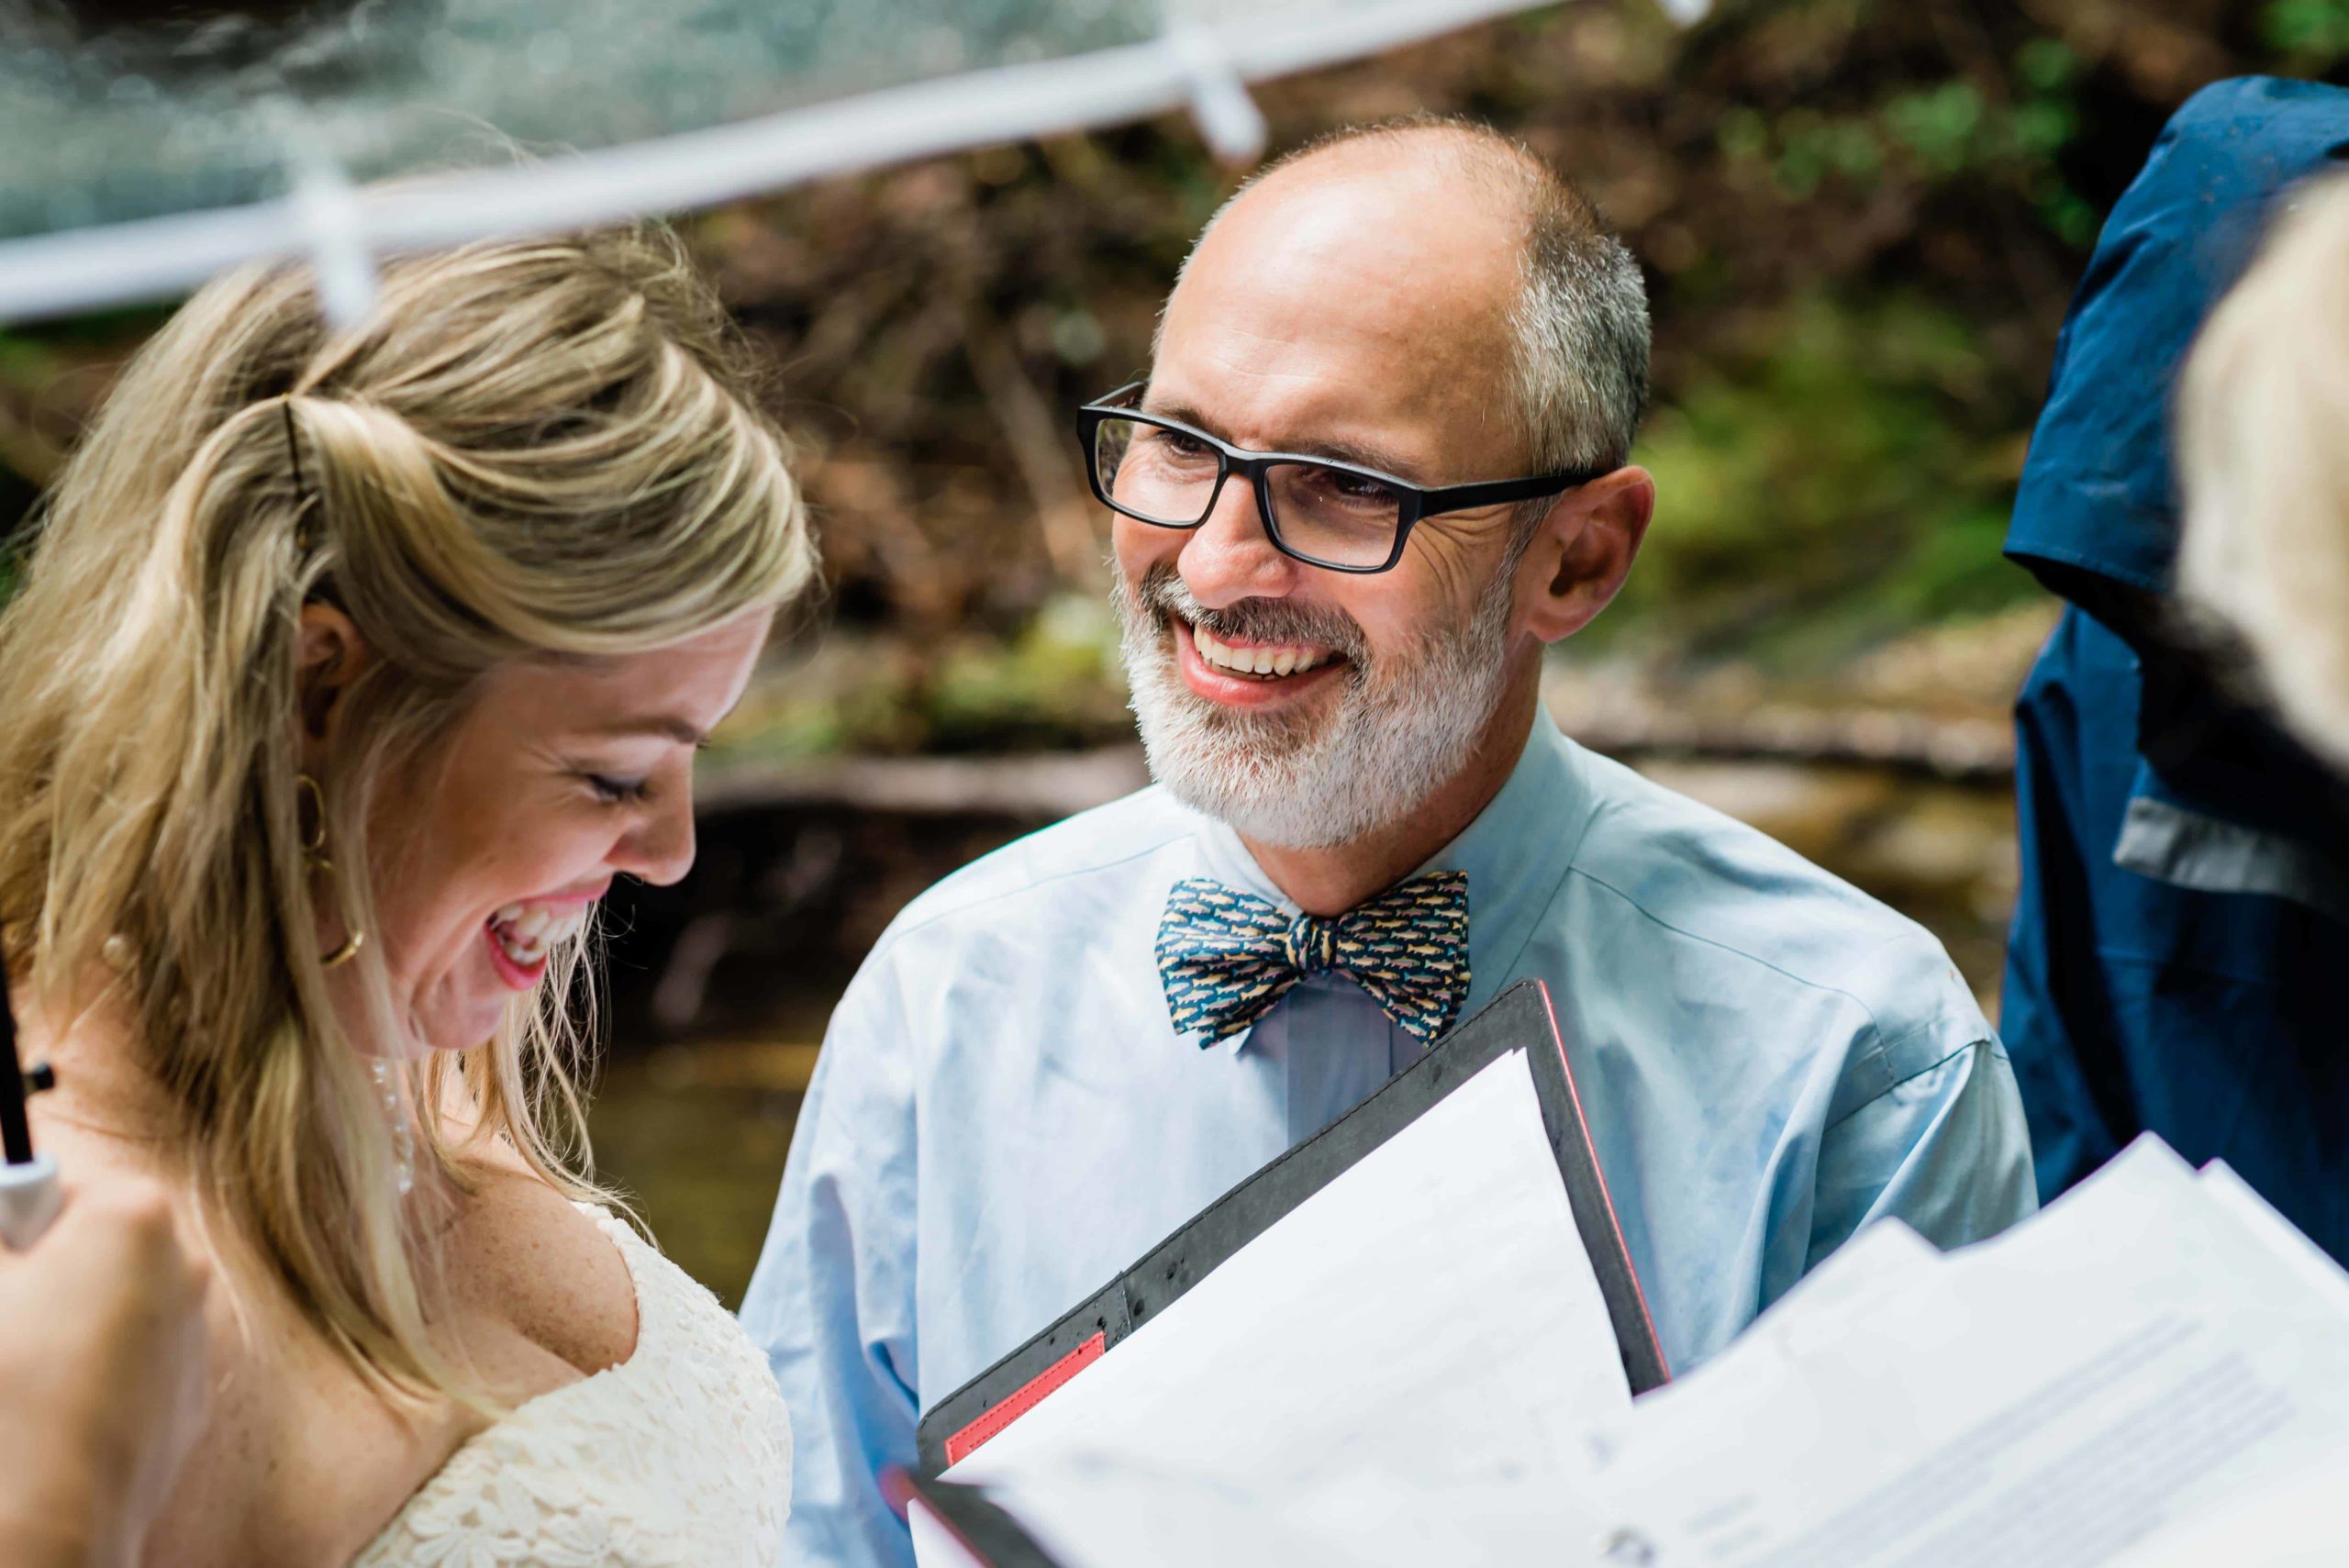 A groom looks at his partner with a huge smile during their hiking elopement ceremony in the rain. They stand together smiling under a clear umbrella.